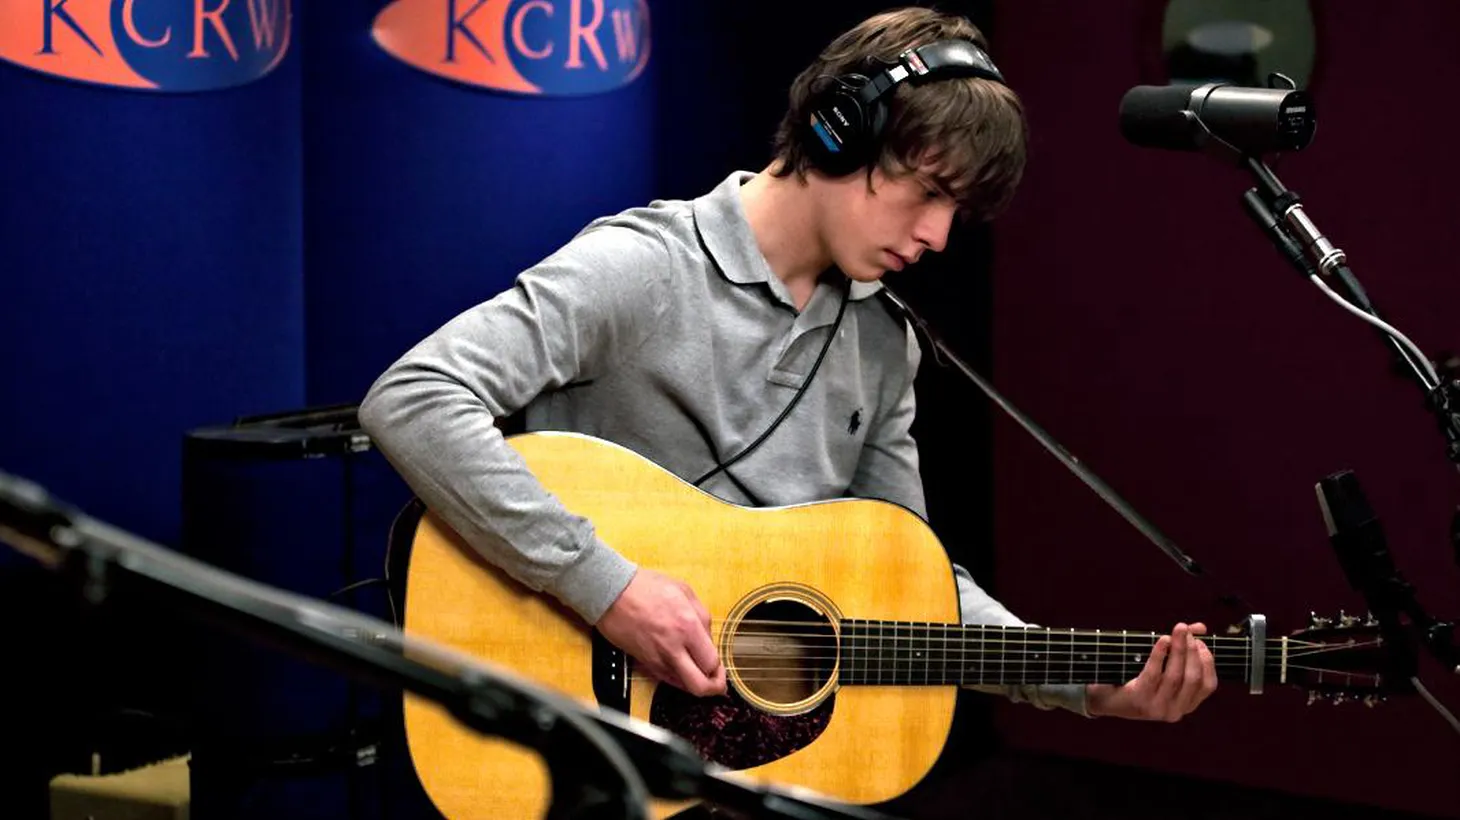 Young UK wunderkind Jake Bugg has wowed us with his smart songcraft and guitar prowess.